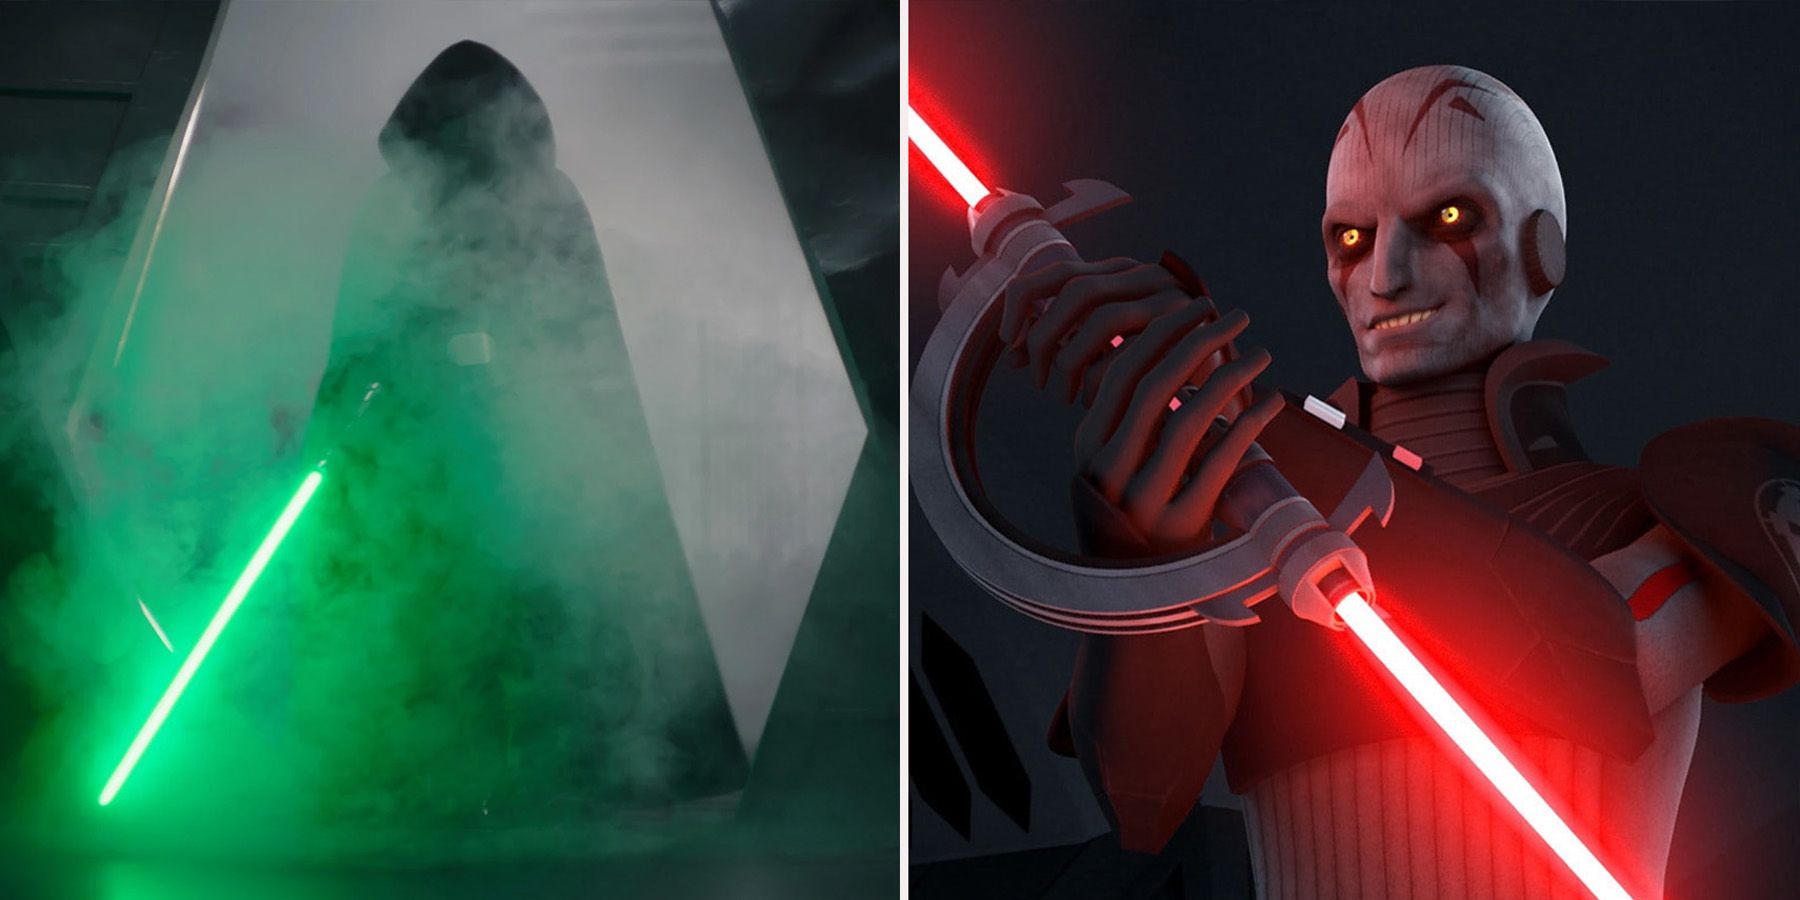 Star Wars Coolest Lightsabers In The Franchise, Ranked featured image